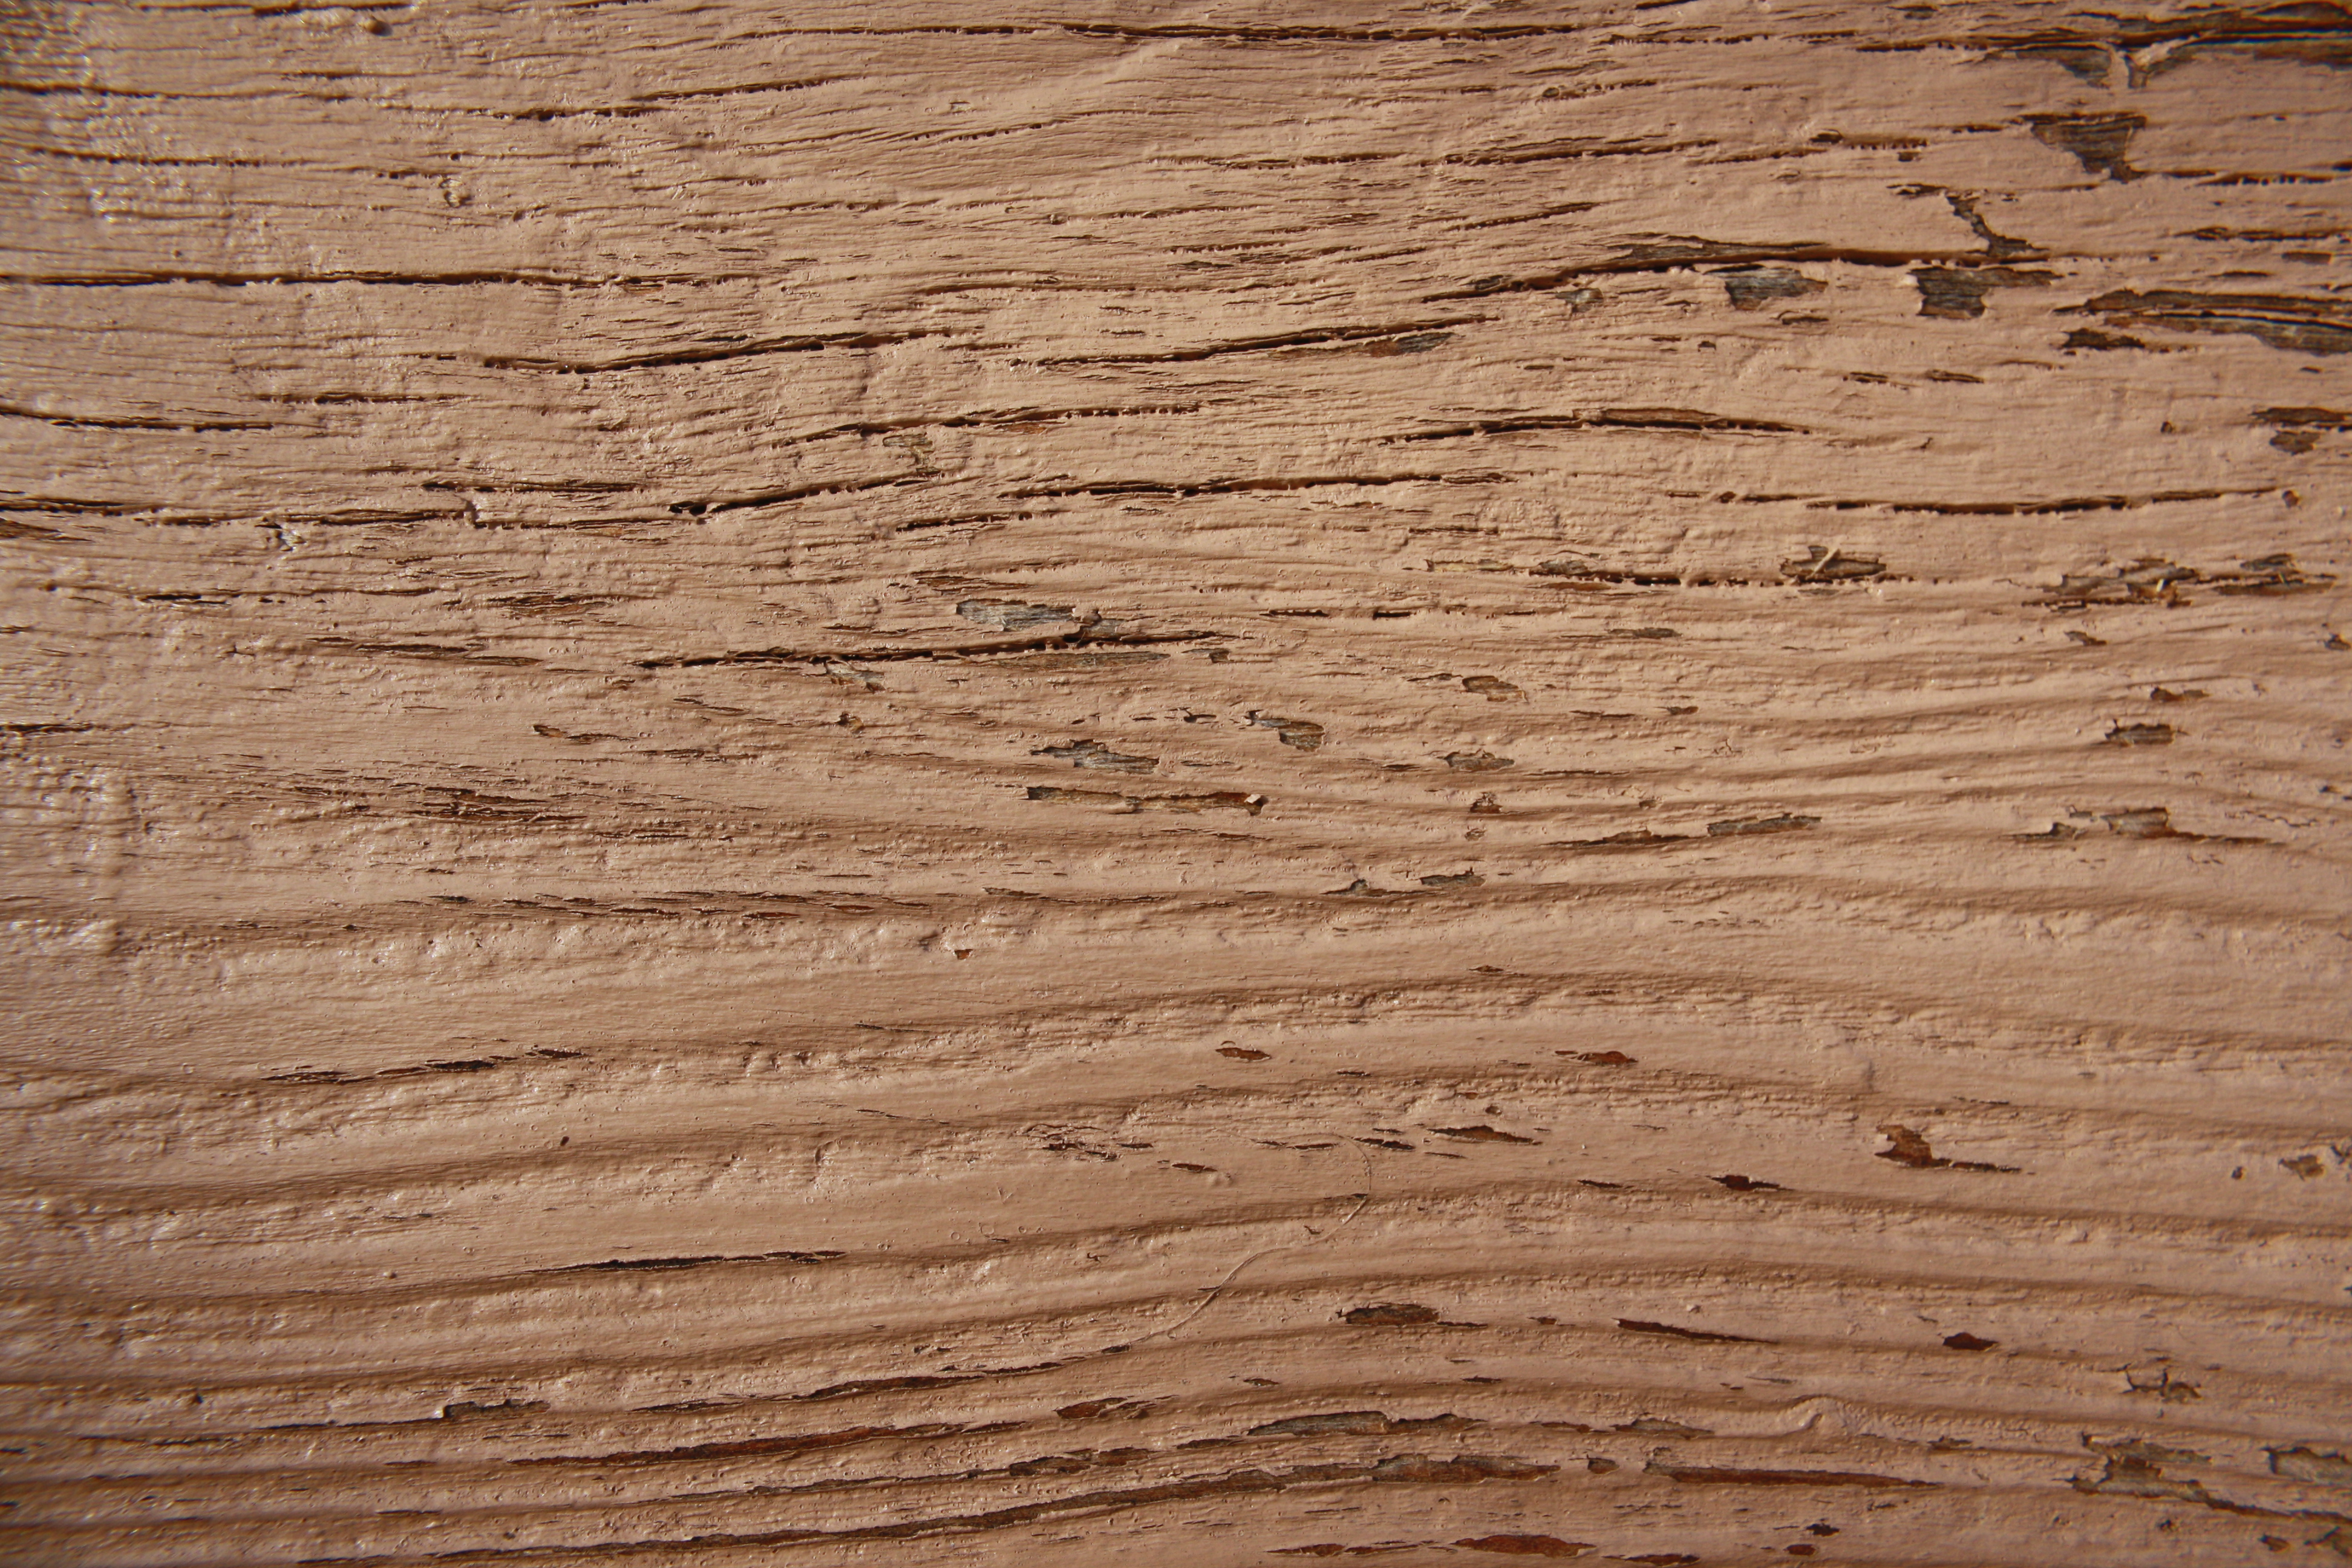 Wood Grain Closeup Texture with Brown Peeling Paint Picture | Free ...